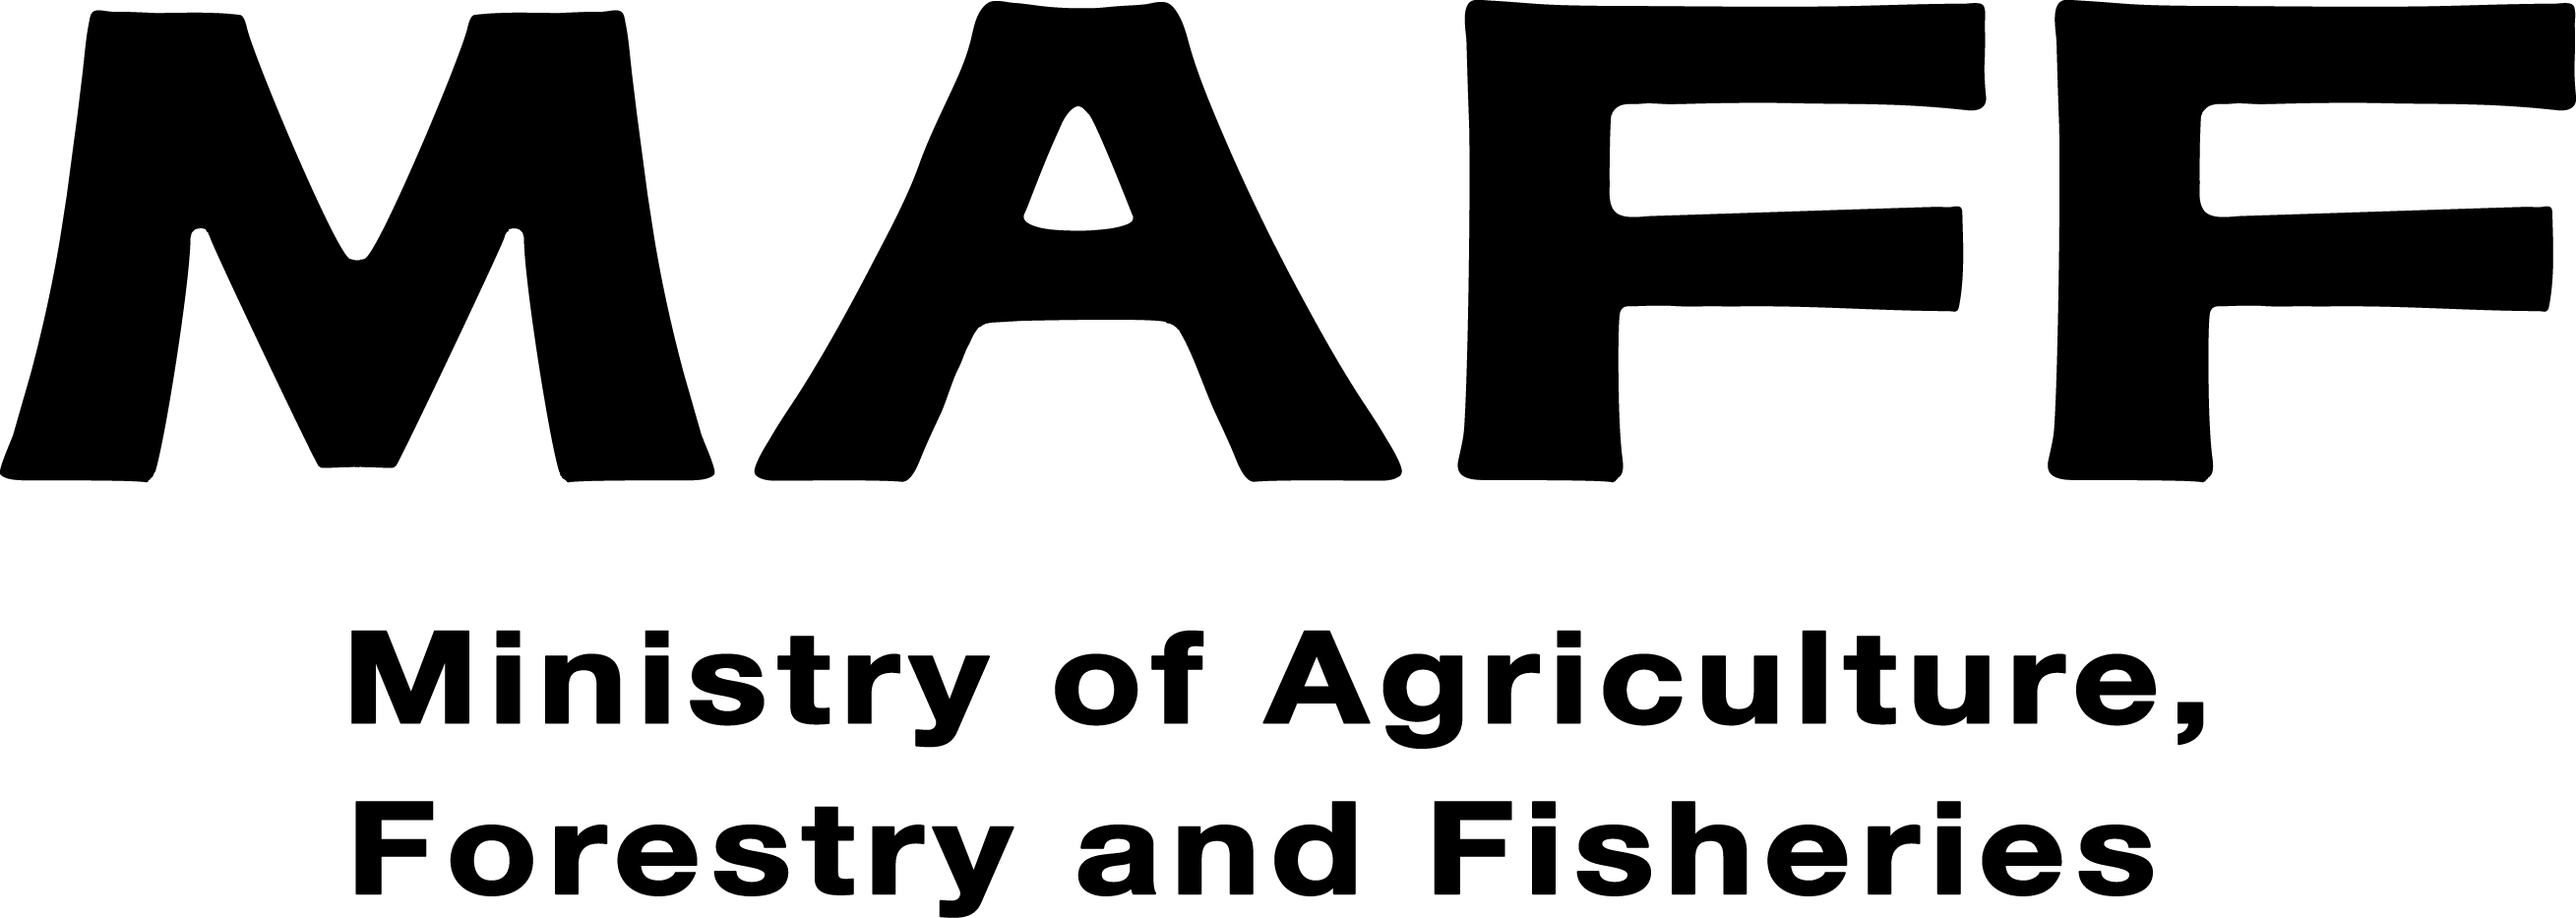 MAFF Ministry of Agriculture, Forestry and Fisheries